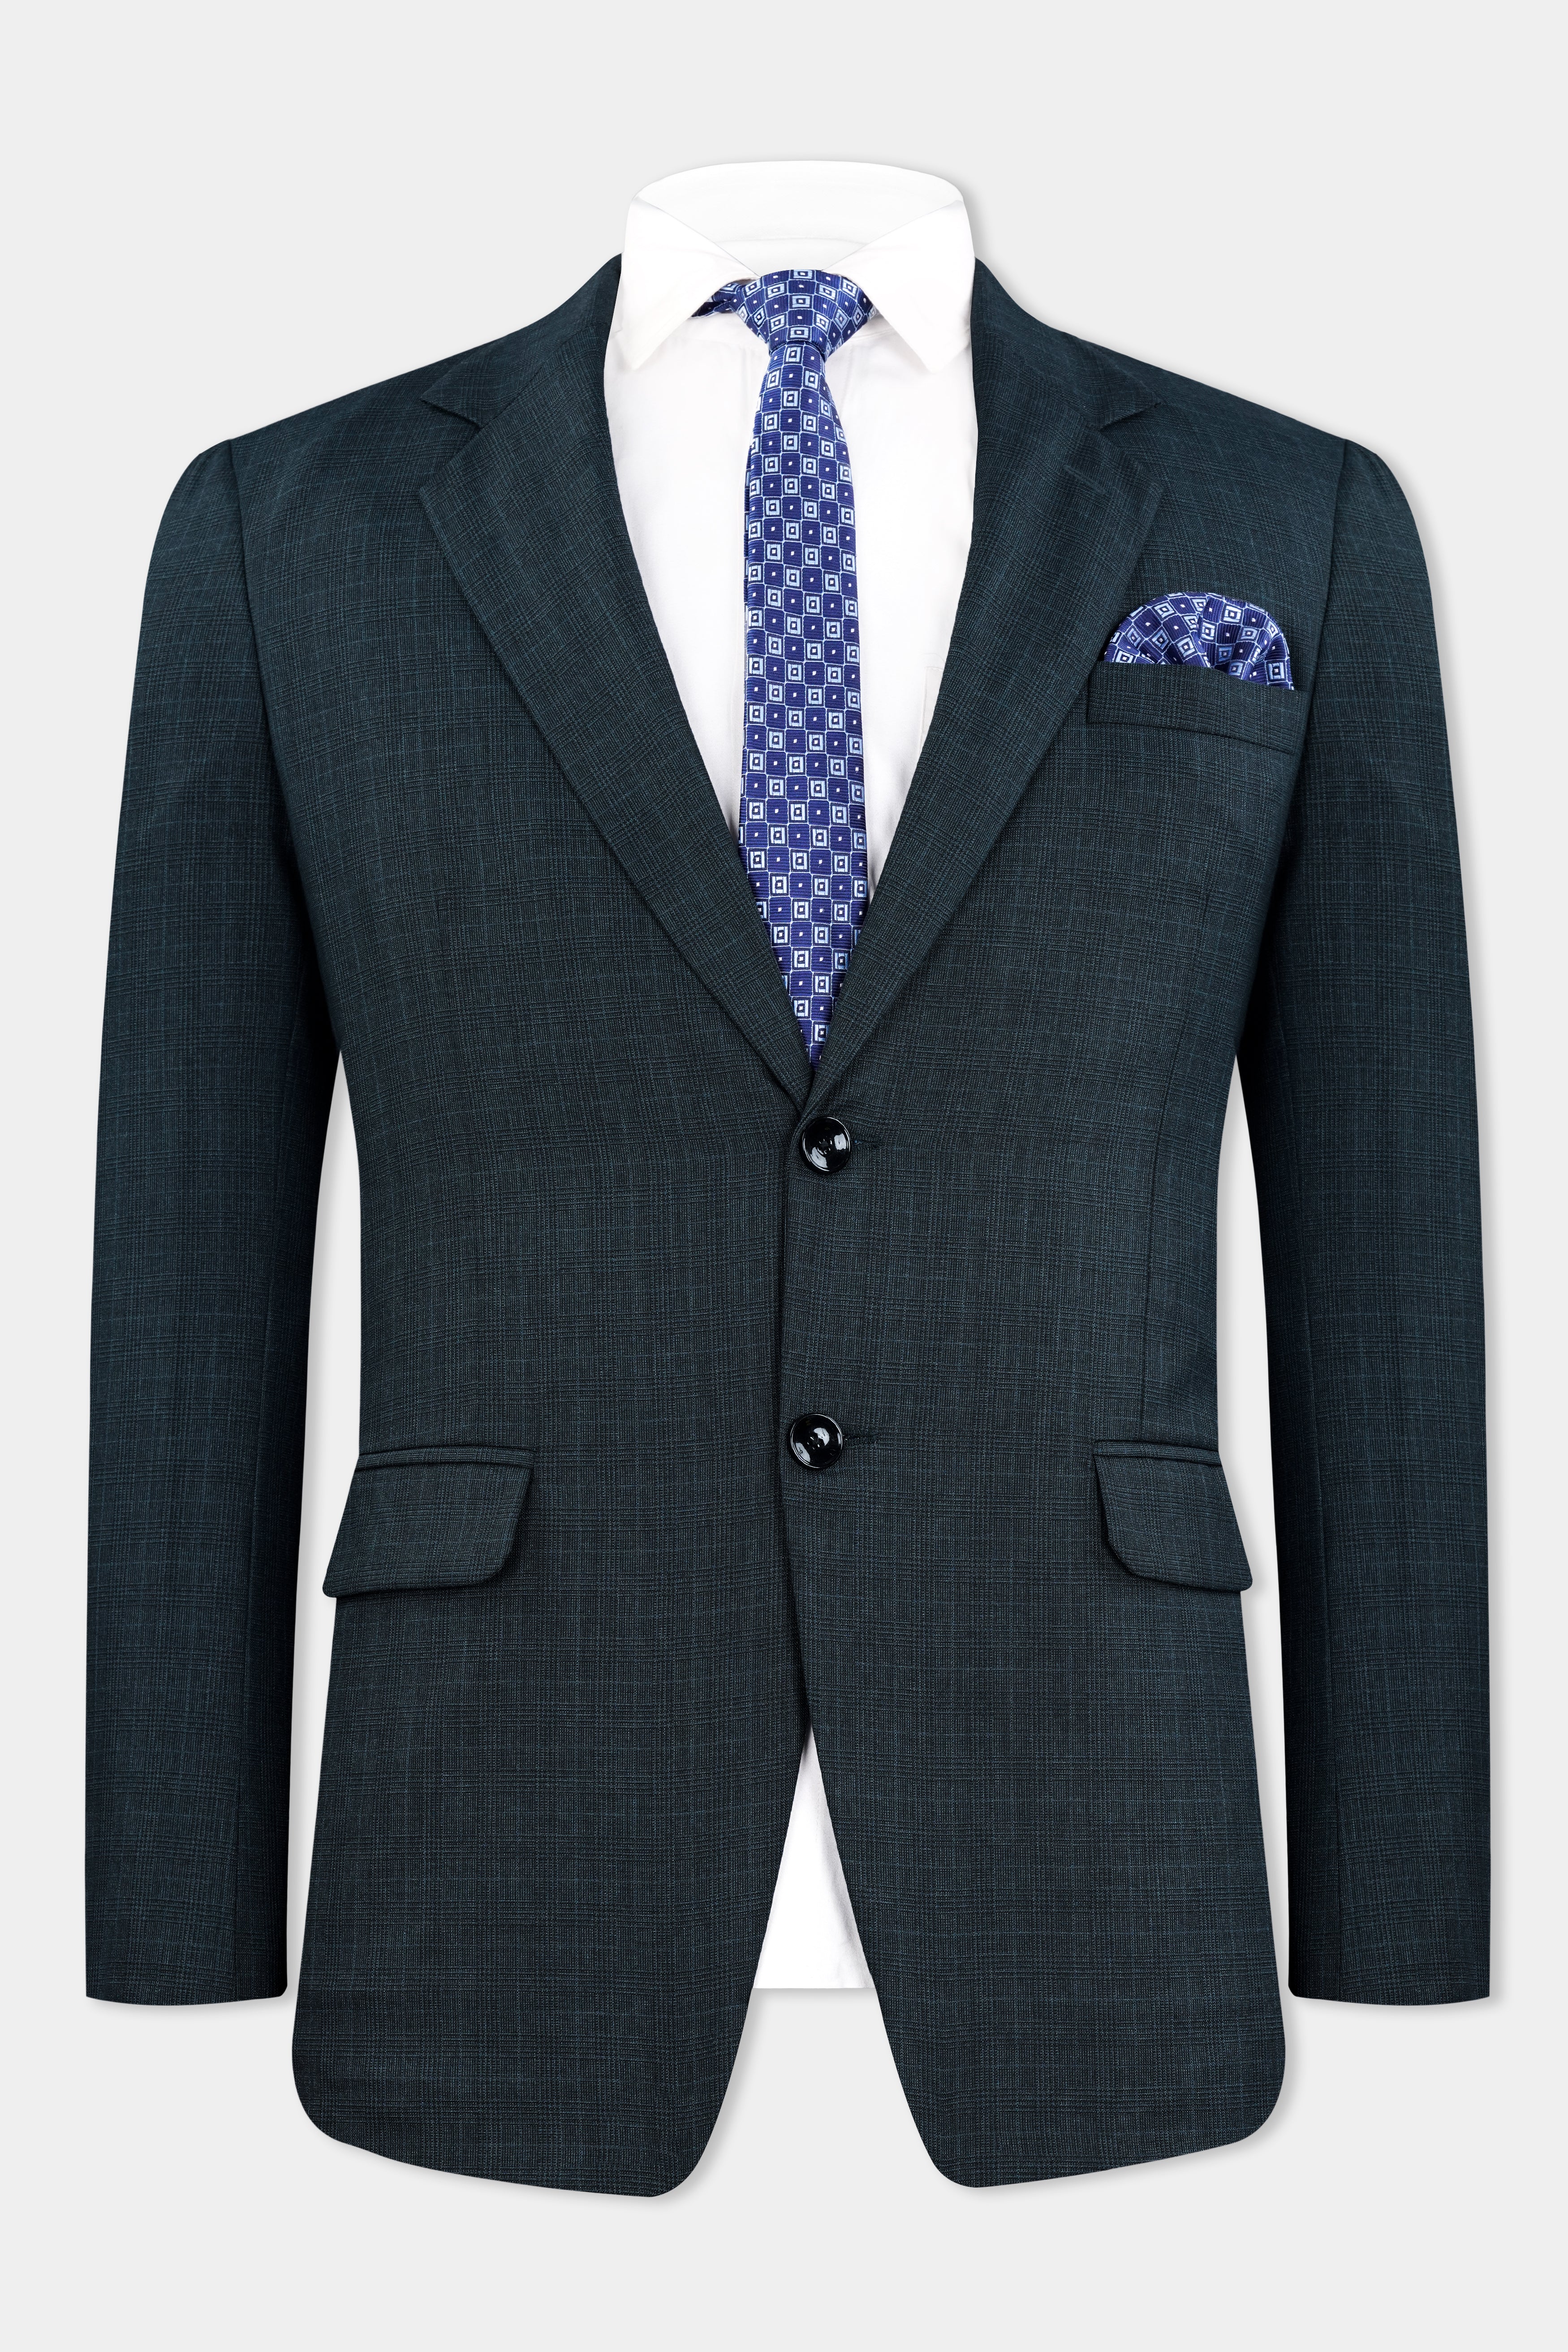 Charade Blue Wool Rich Single Breasted Suit ST2911-SB-36,ST2911-SB-38,ST2911-SB-40,ST2911-SB-42,ST2911-SB-44,ST2911-SB-46,ST2911-SB-48,ST2911-SB-50,ST2911-SB-52,ST2911-SB-54,ST2911-SB-56,ST2911-SB-58,ST2911-SB-60